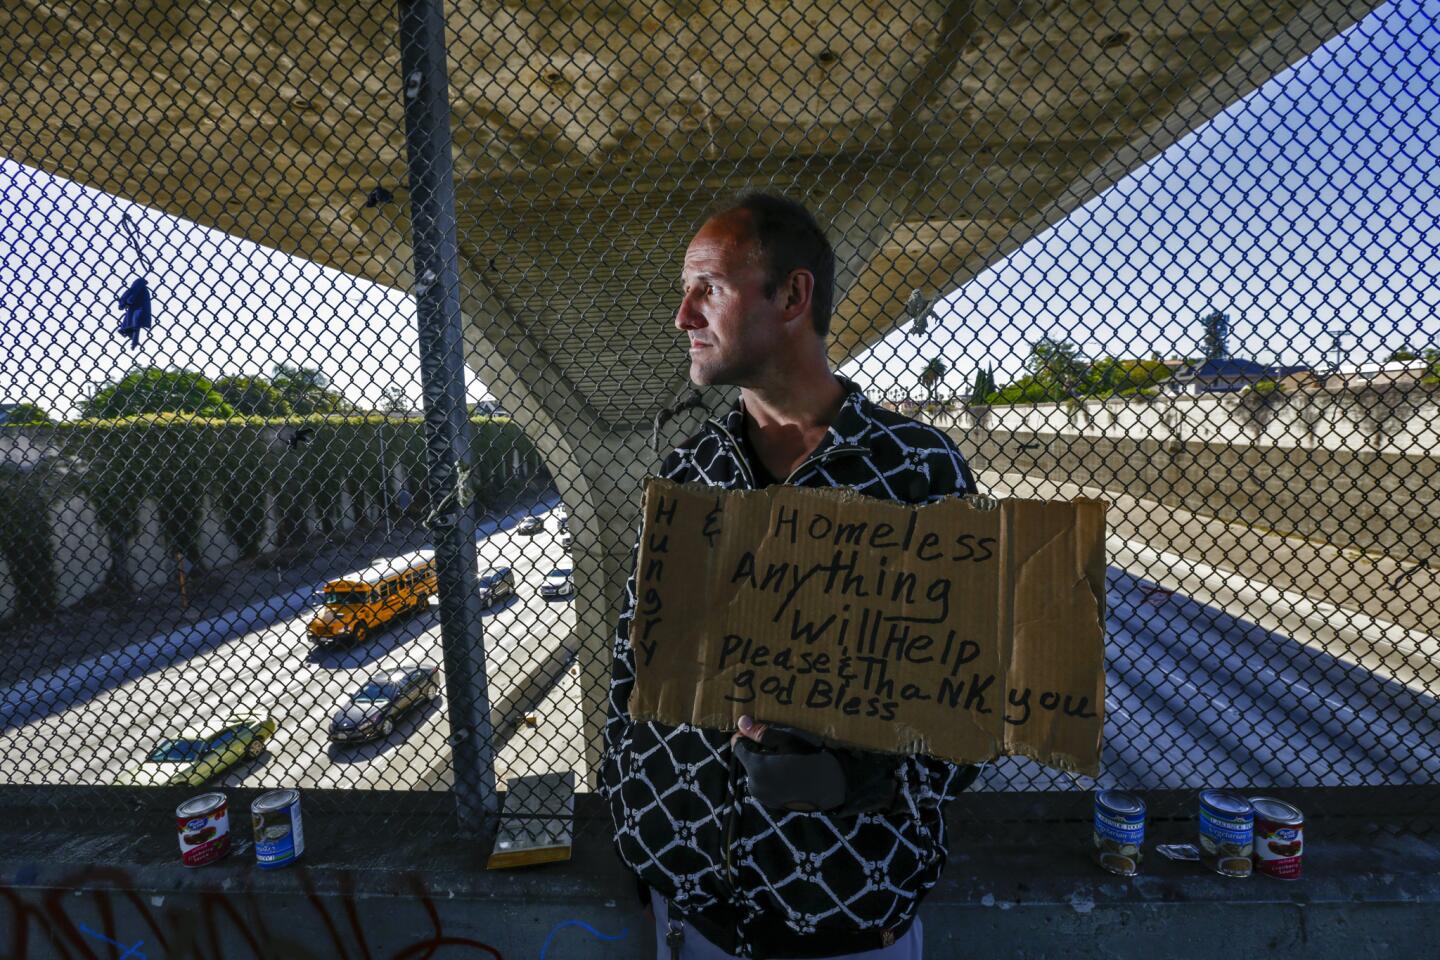 Homeless living above the 110 Freeway